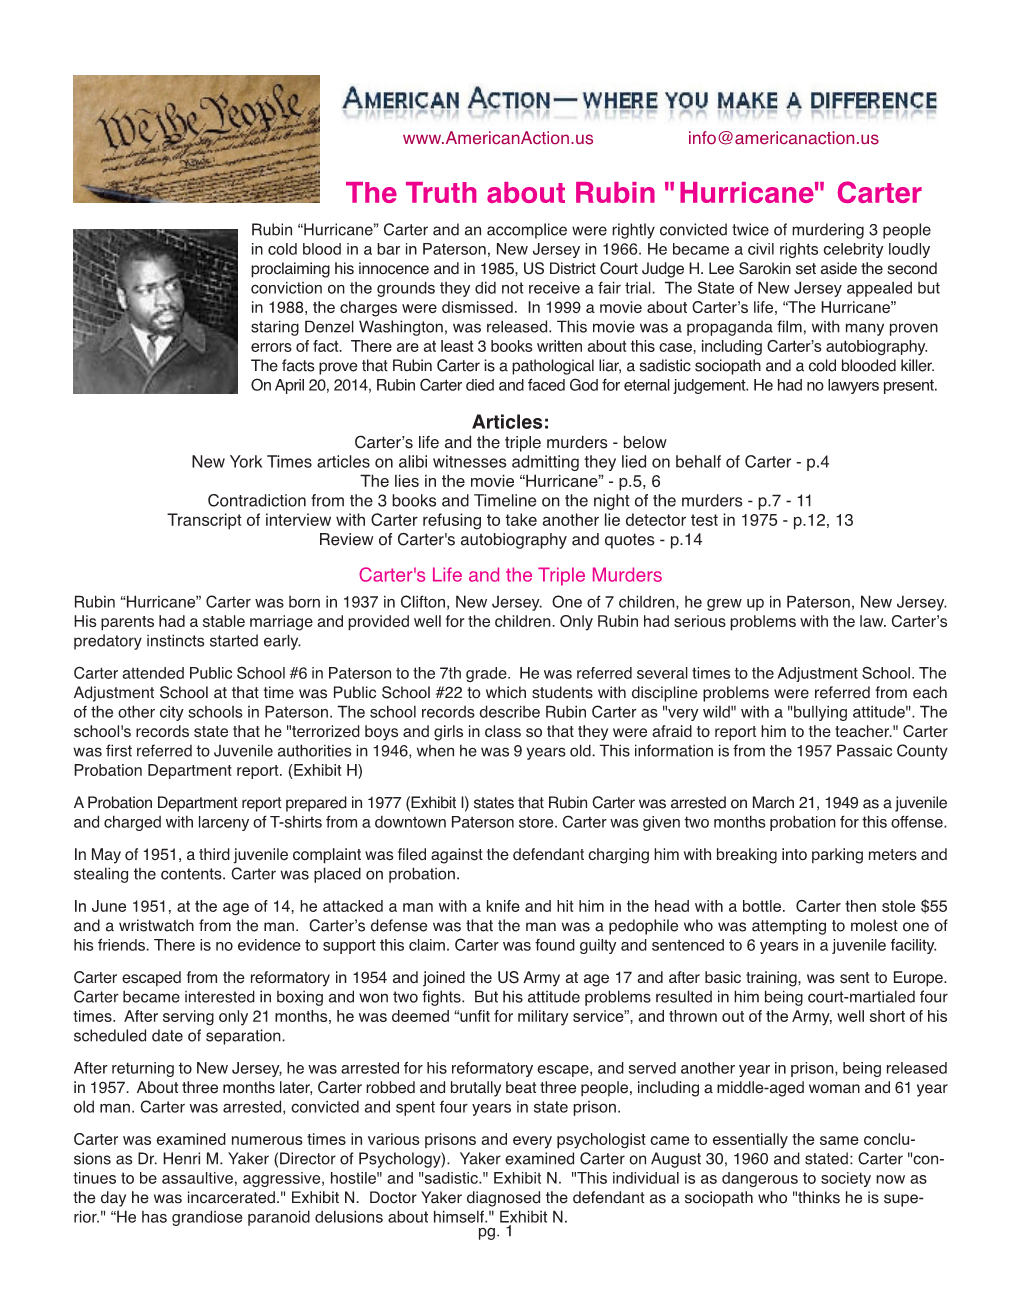 The Truth About Rubin "Hurricane" Carter